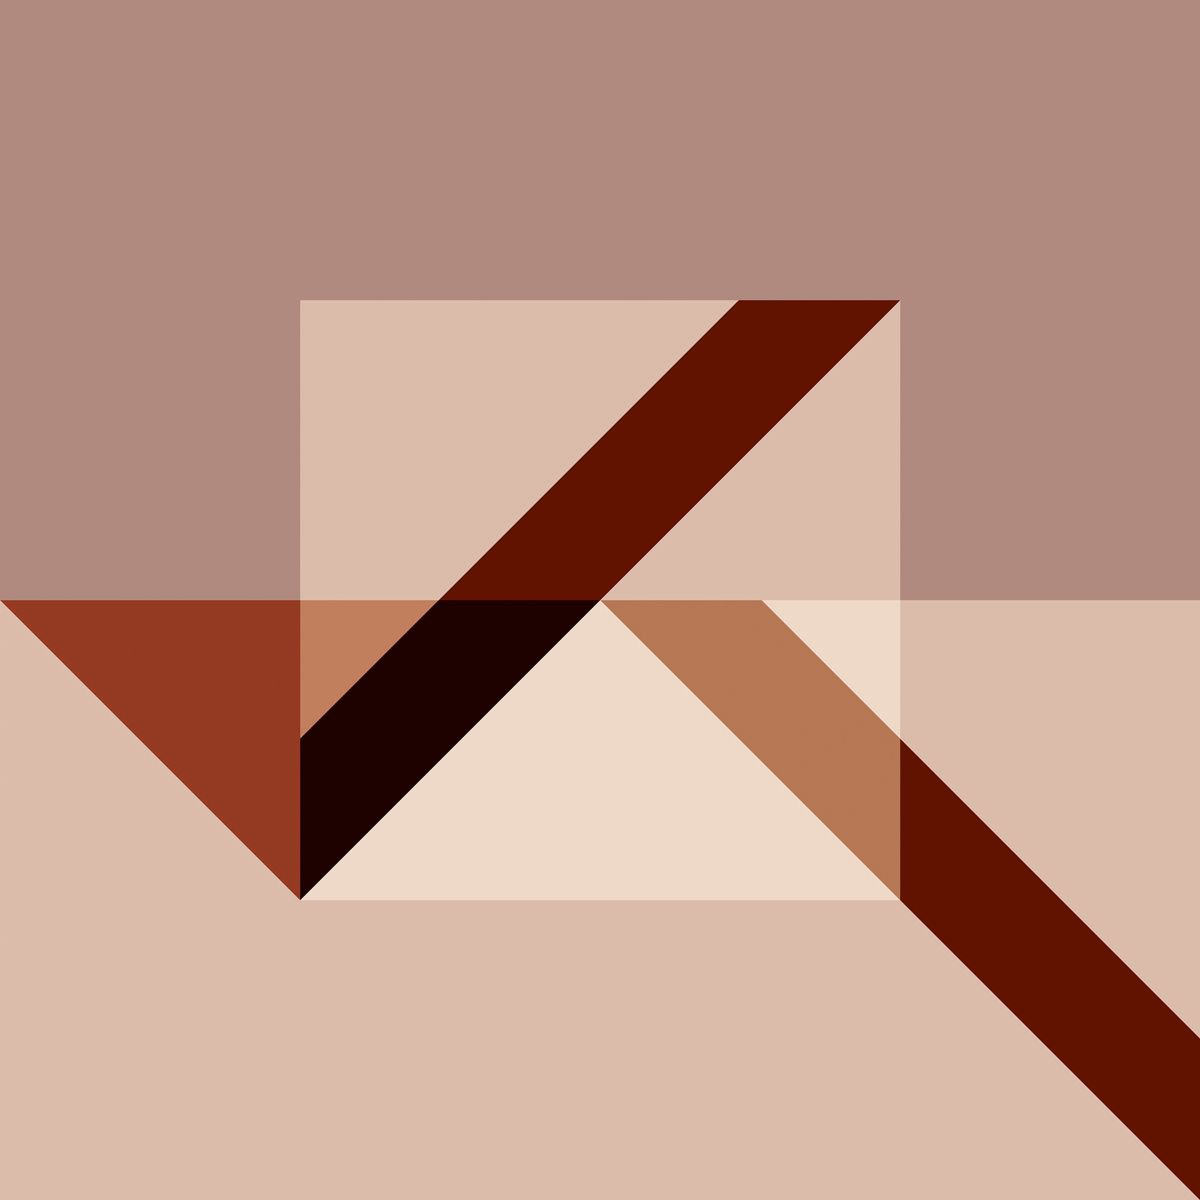 Geometric Angles With Square In Shades Of Brown by Michael  Hunter BA (Hons)